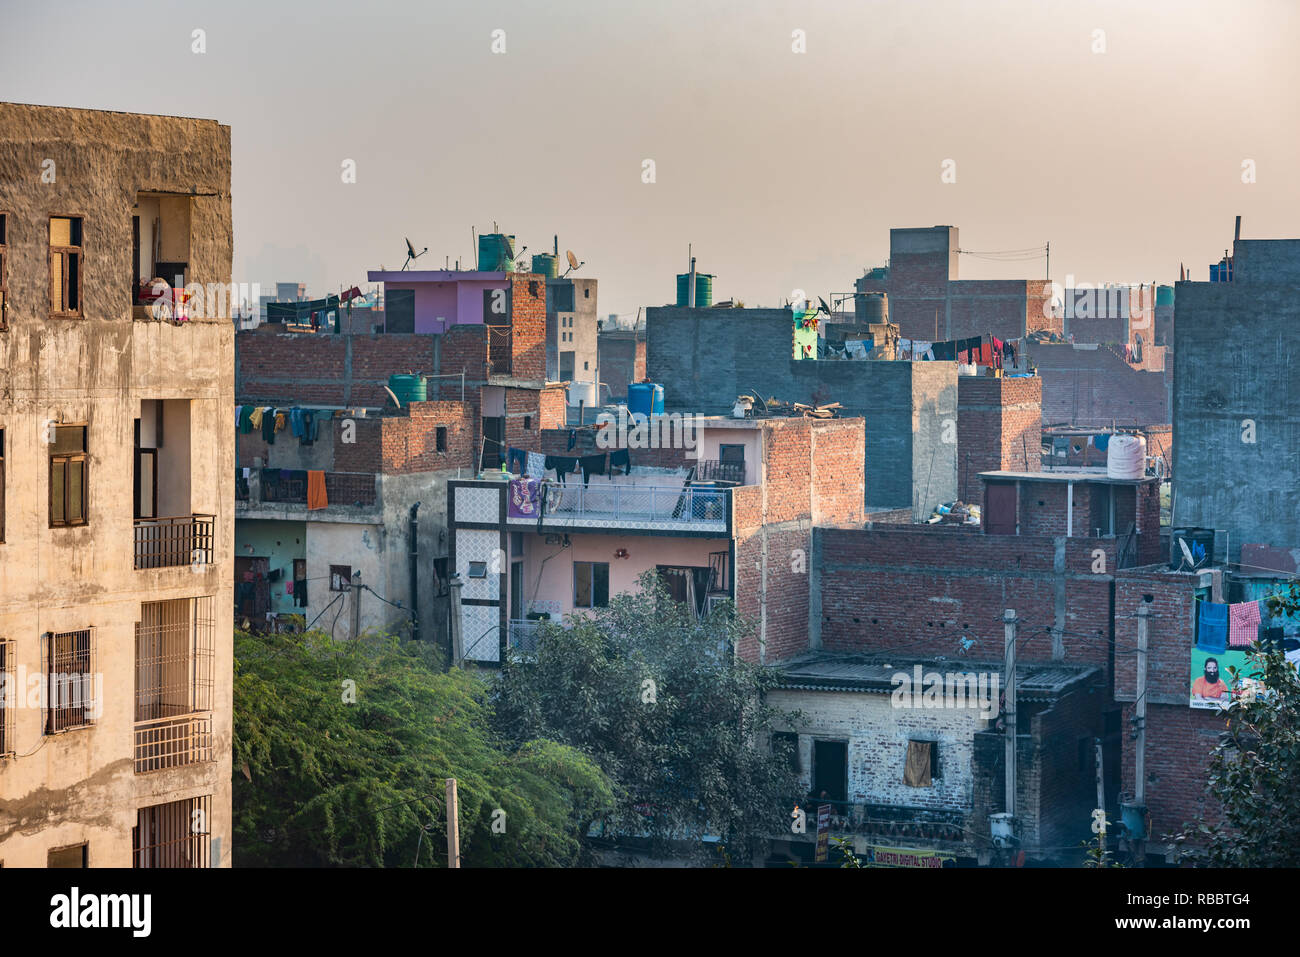 Buildings and roofs in the resettlement New Delhi locality of JJ Colony Madanpur Khadar provide an interesting urban landscape in the morning light Stock Photo